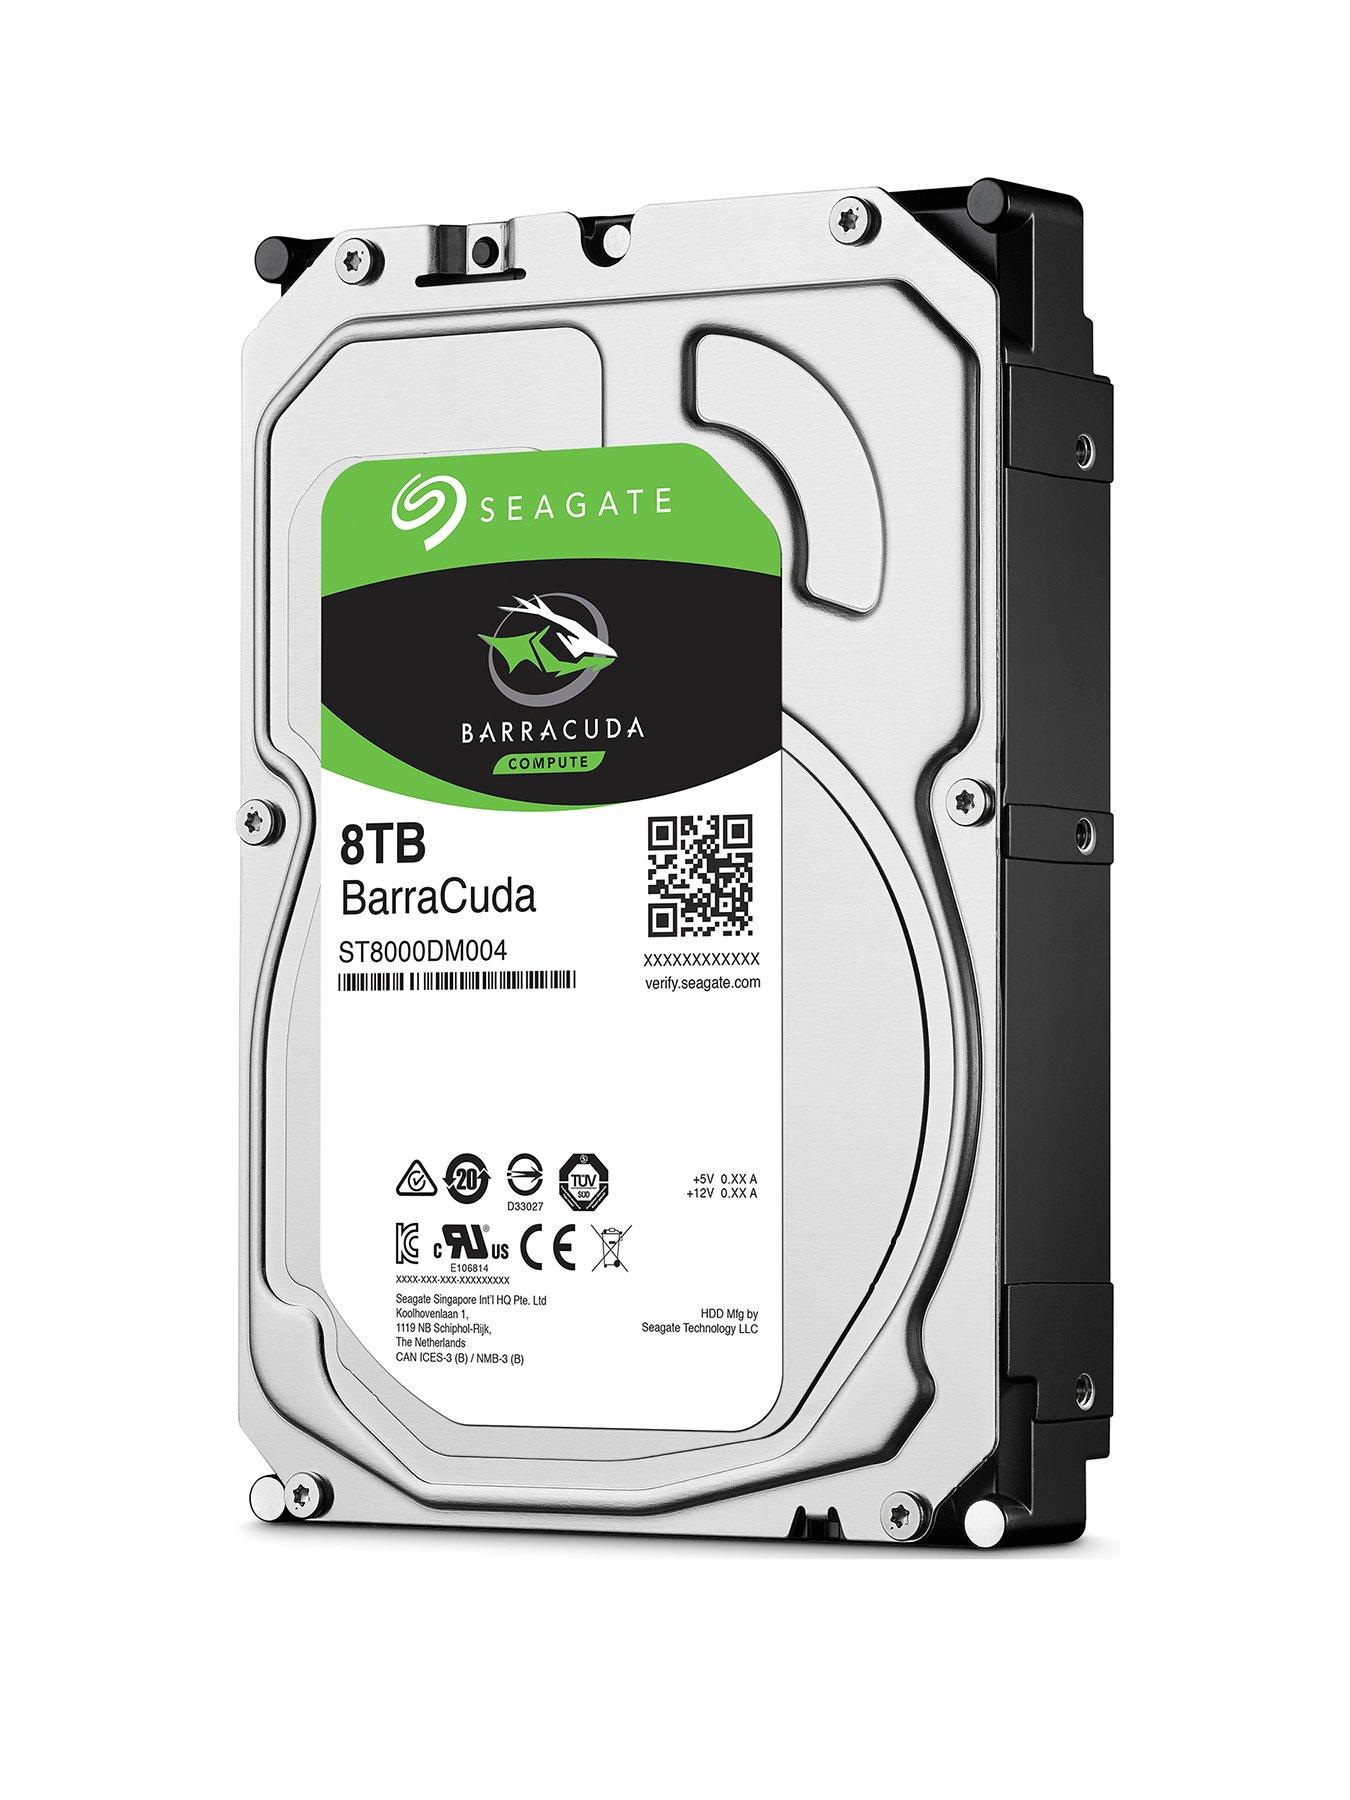 seagate 2tb internal hard drive not detected